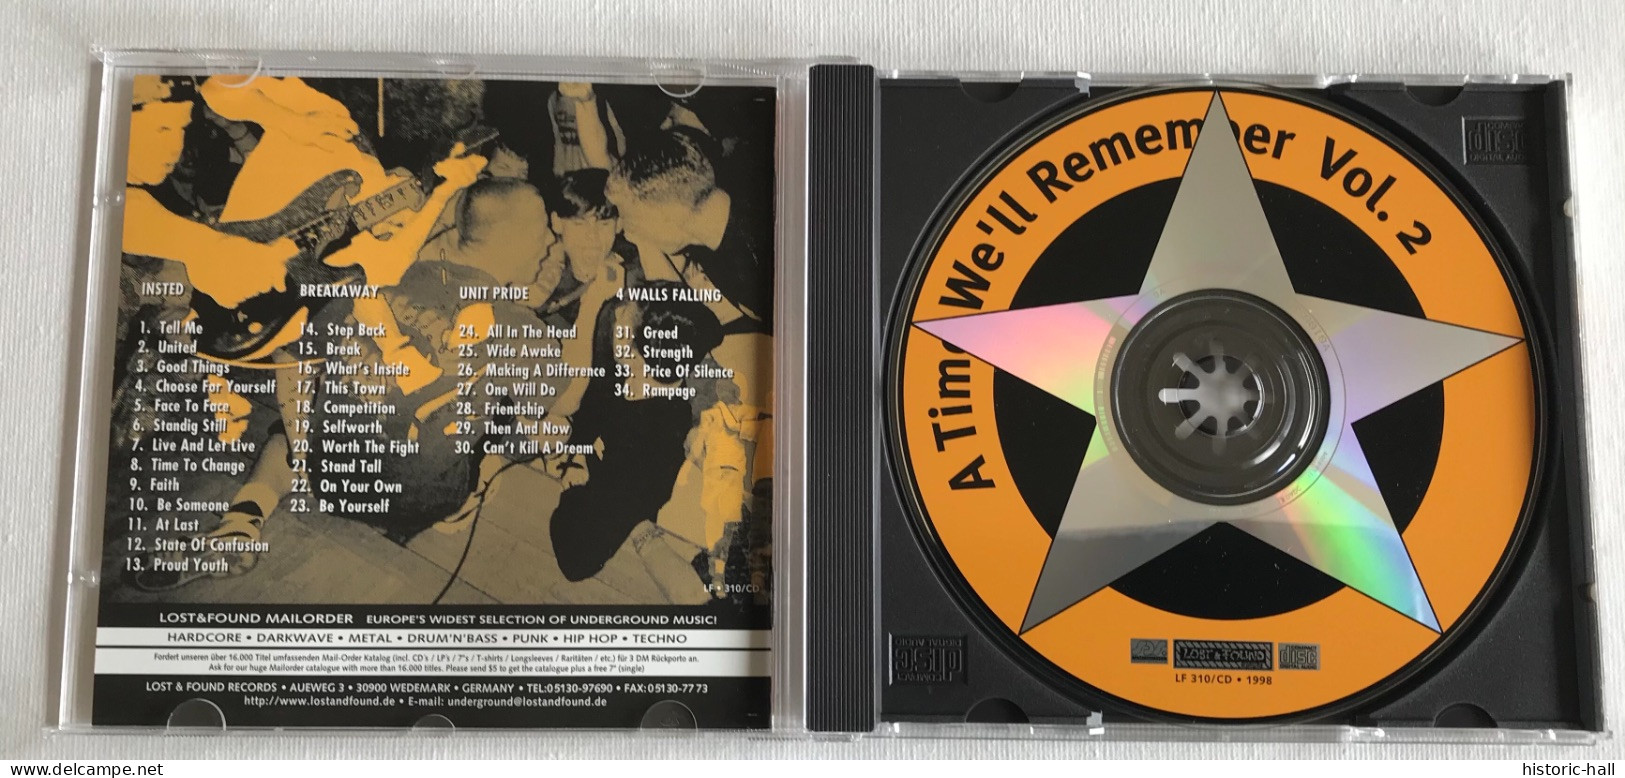 A TIME WE’LL REMEMBER - 2 - CD - 1998 - INSTED / UNIT PRIDE - BREAKAWAY - FOUR WALLS FALLING - Punk